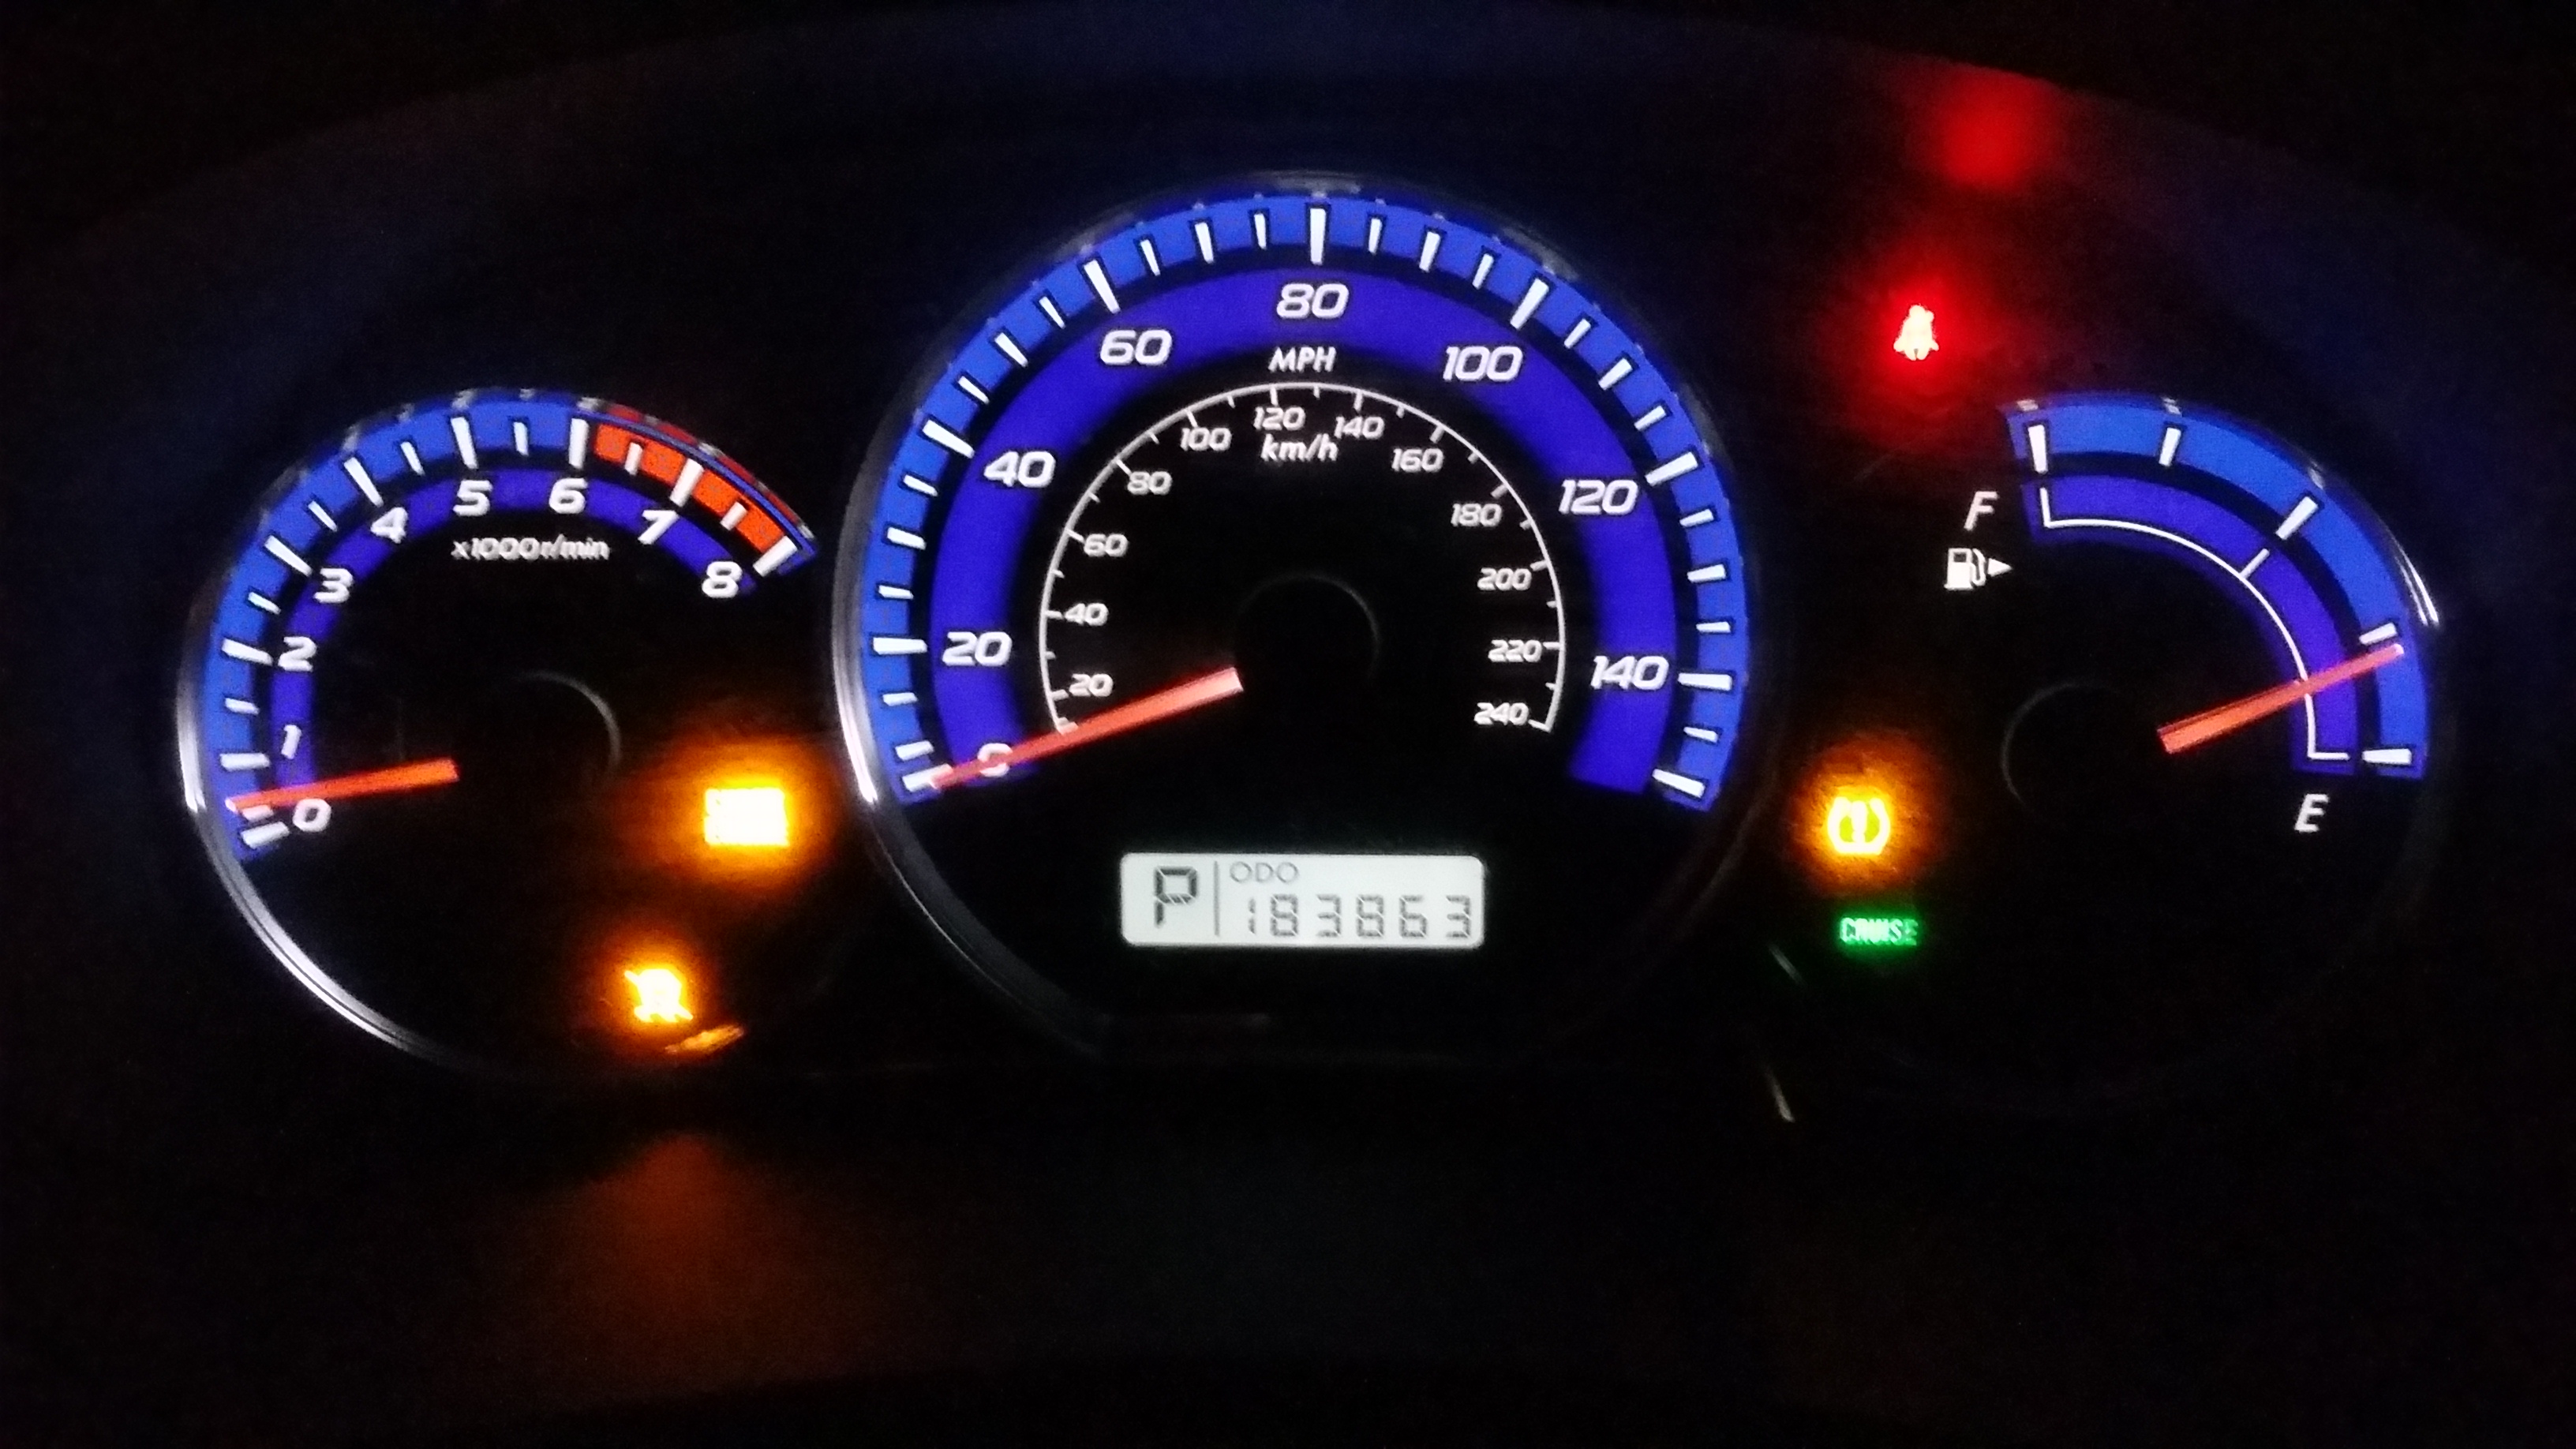 ALL of the dash lights on with car running 